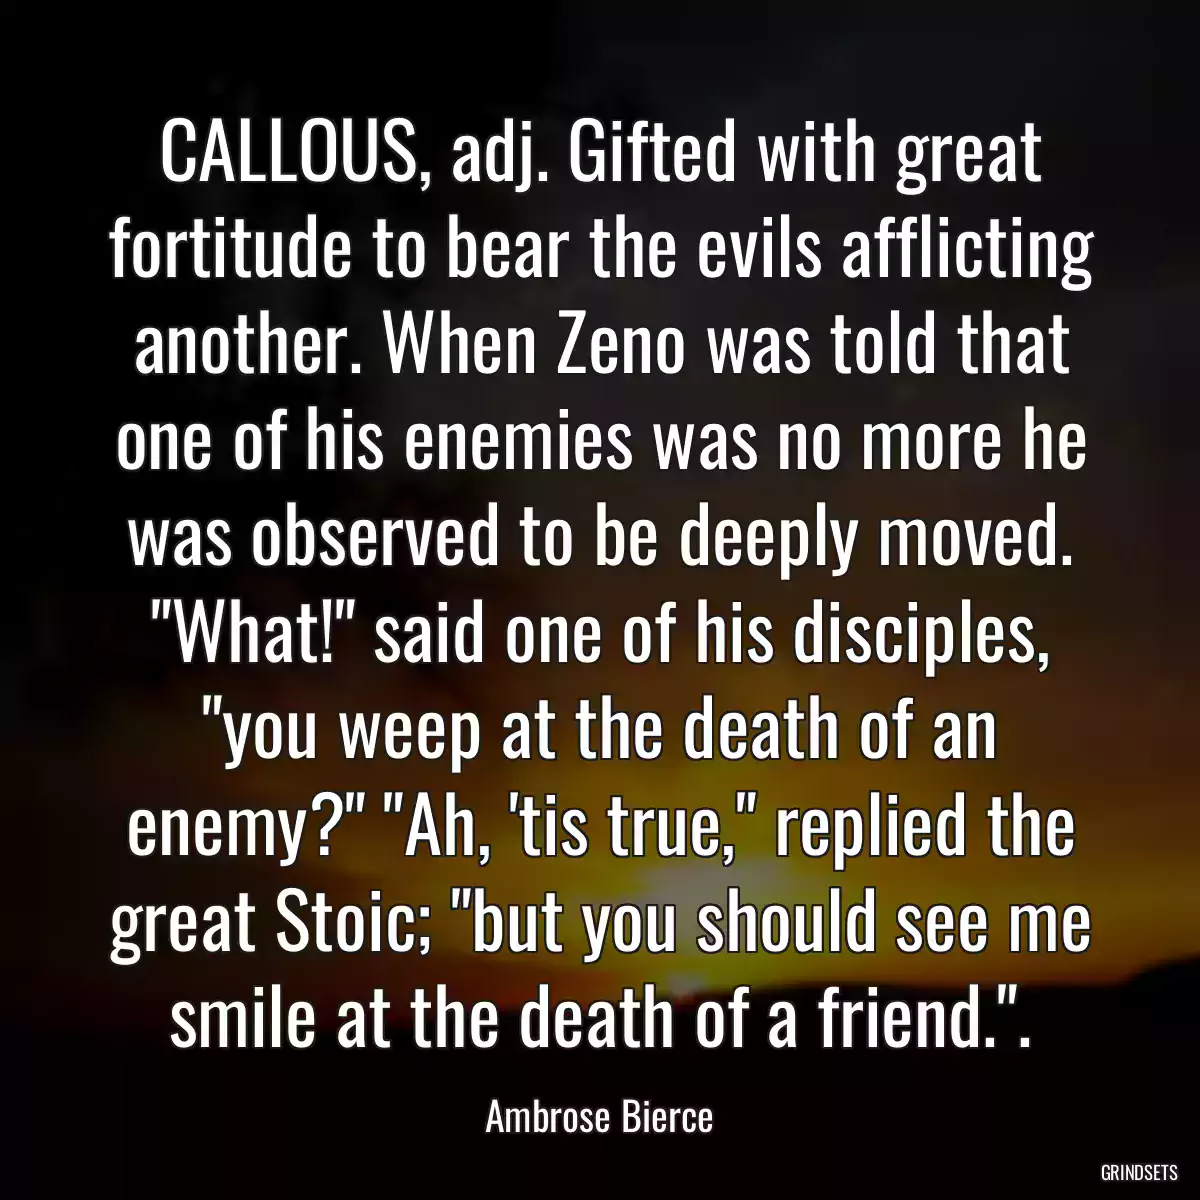 CALLOUS, adj. Gifted with great fortitude to bear the evils afflicting another. When Zeno was told that one of his enemies was no more he was observed to be deeply moved. \